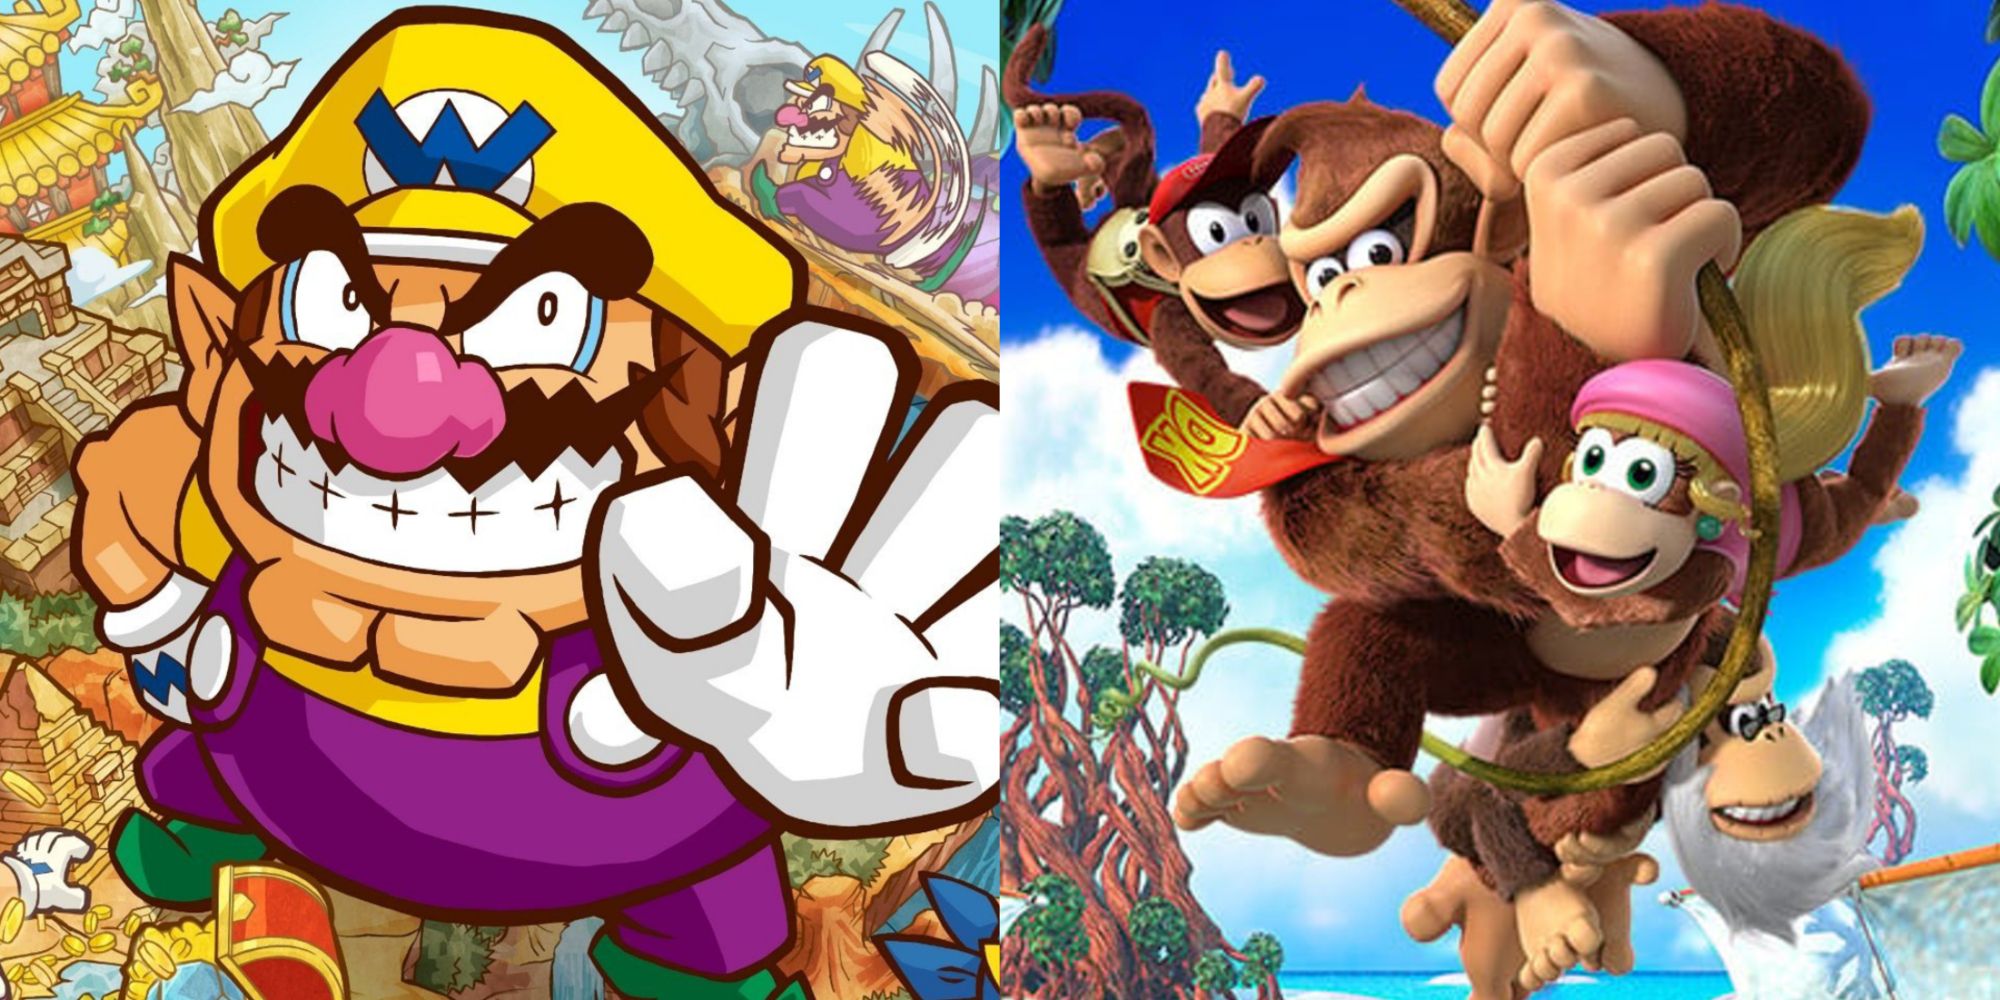 Split image of artwork for Wario Land and Donkey Kong Country